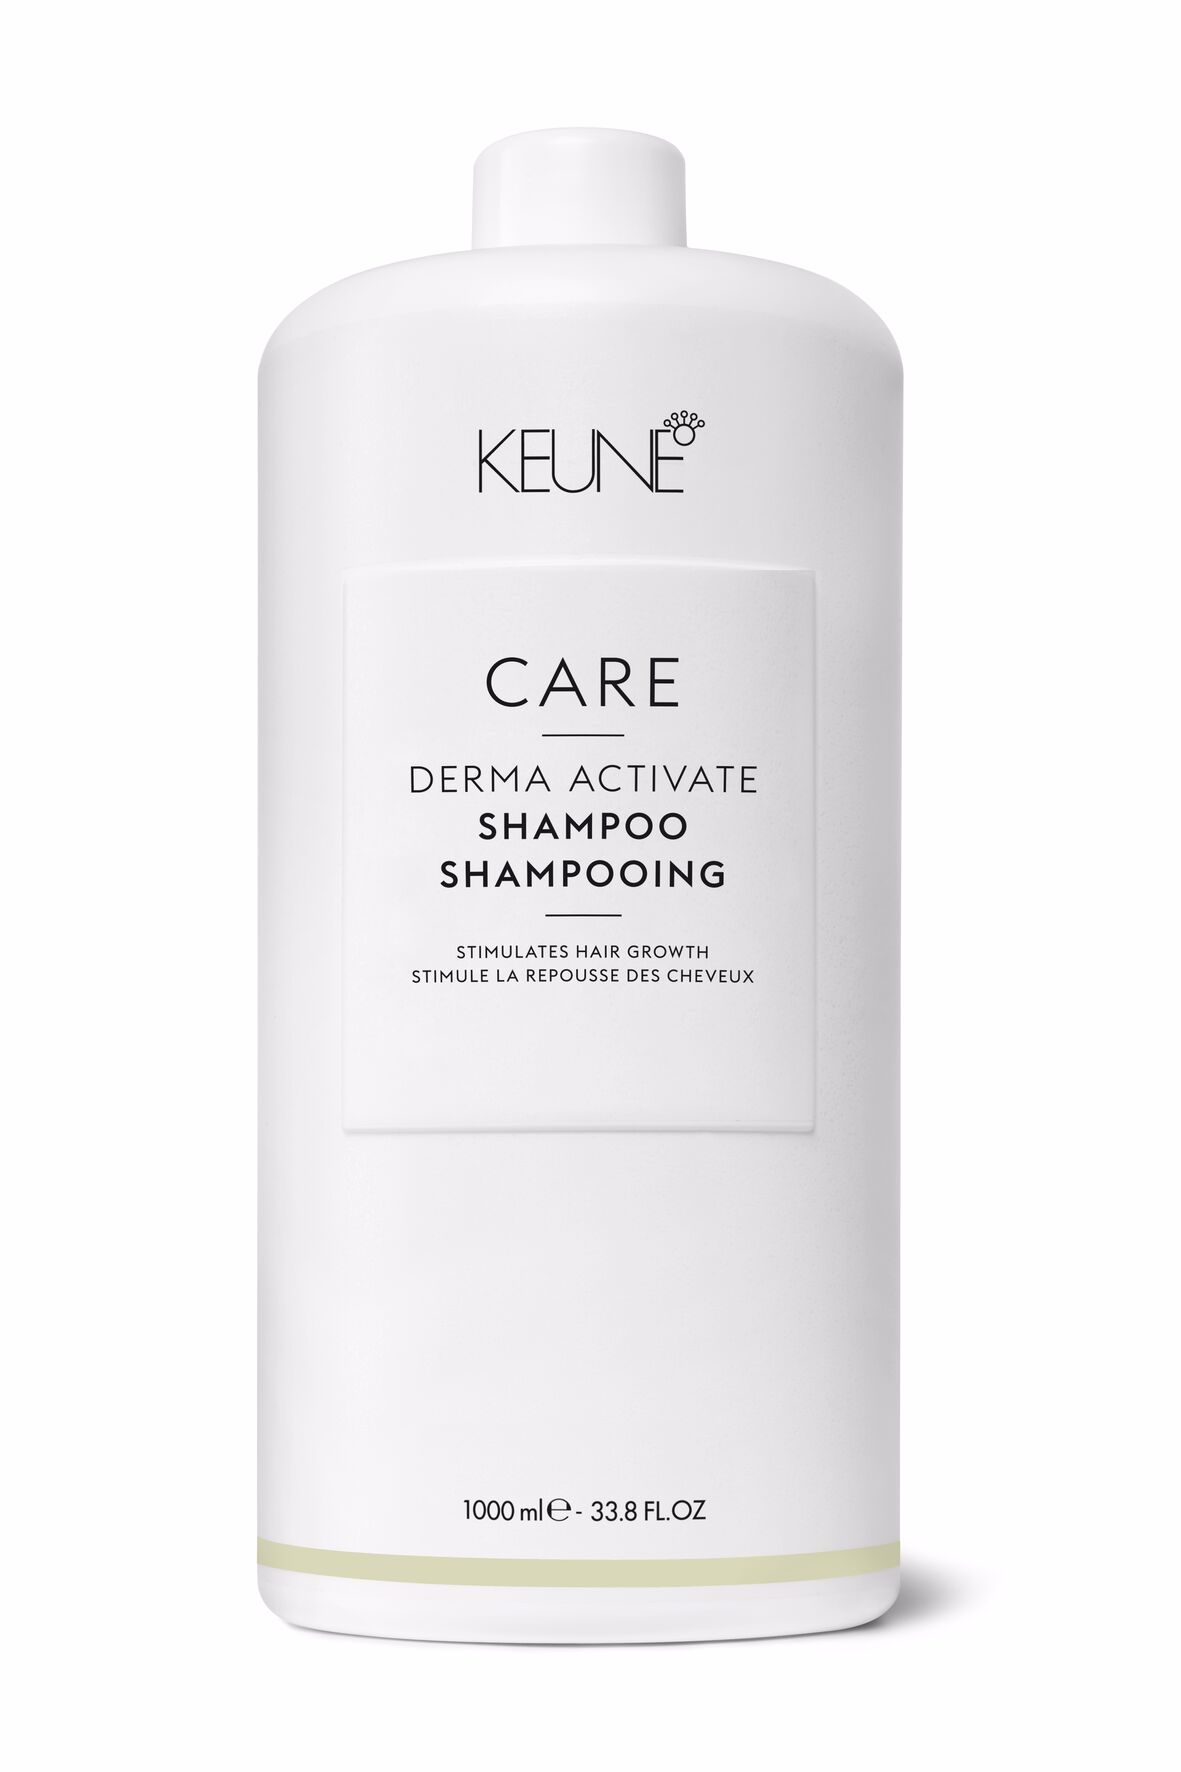 Defeat hair loss and strengthen your hair with our Derma Activate Shampoo, which is silicone-free. It improves hair structure and promotes hair growth. Available on keune.ch.